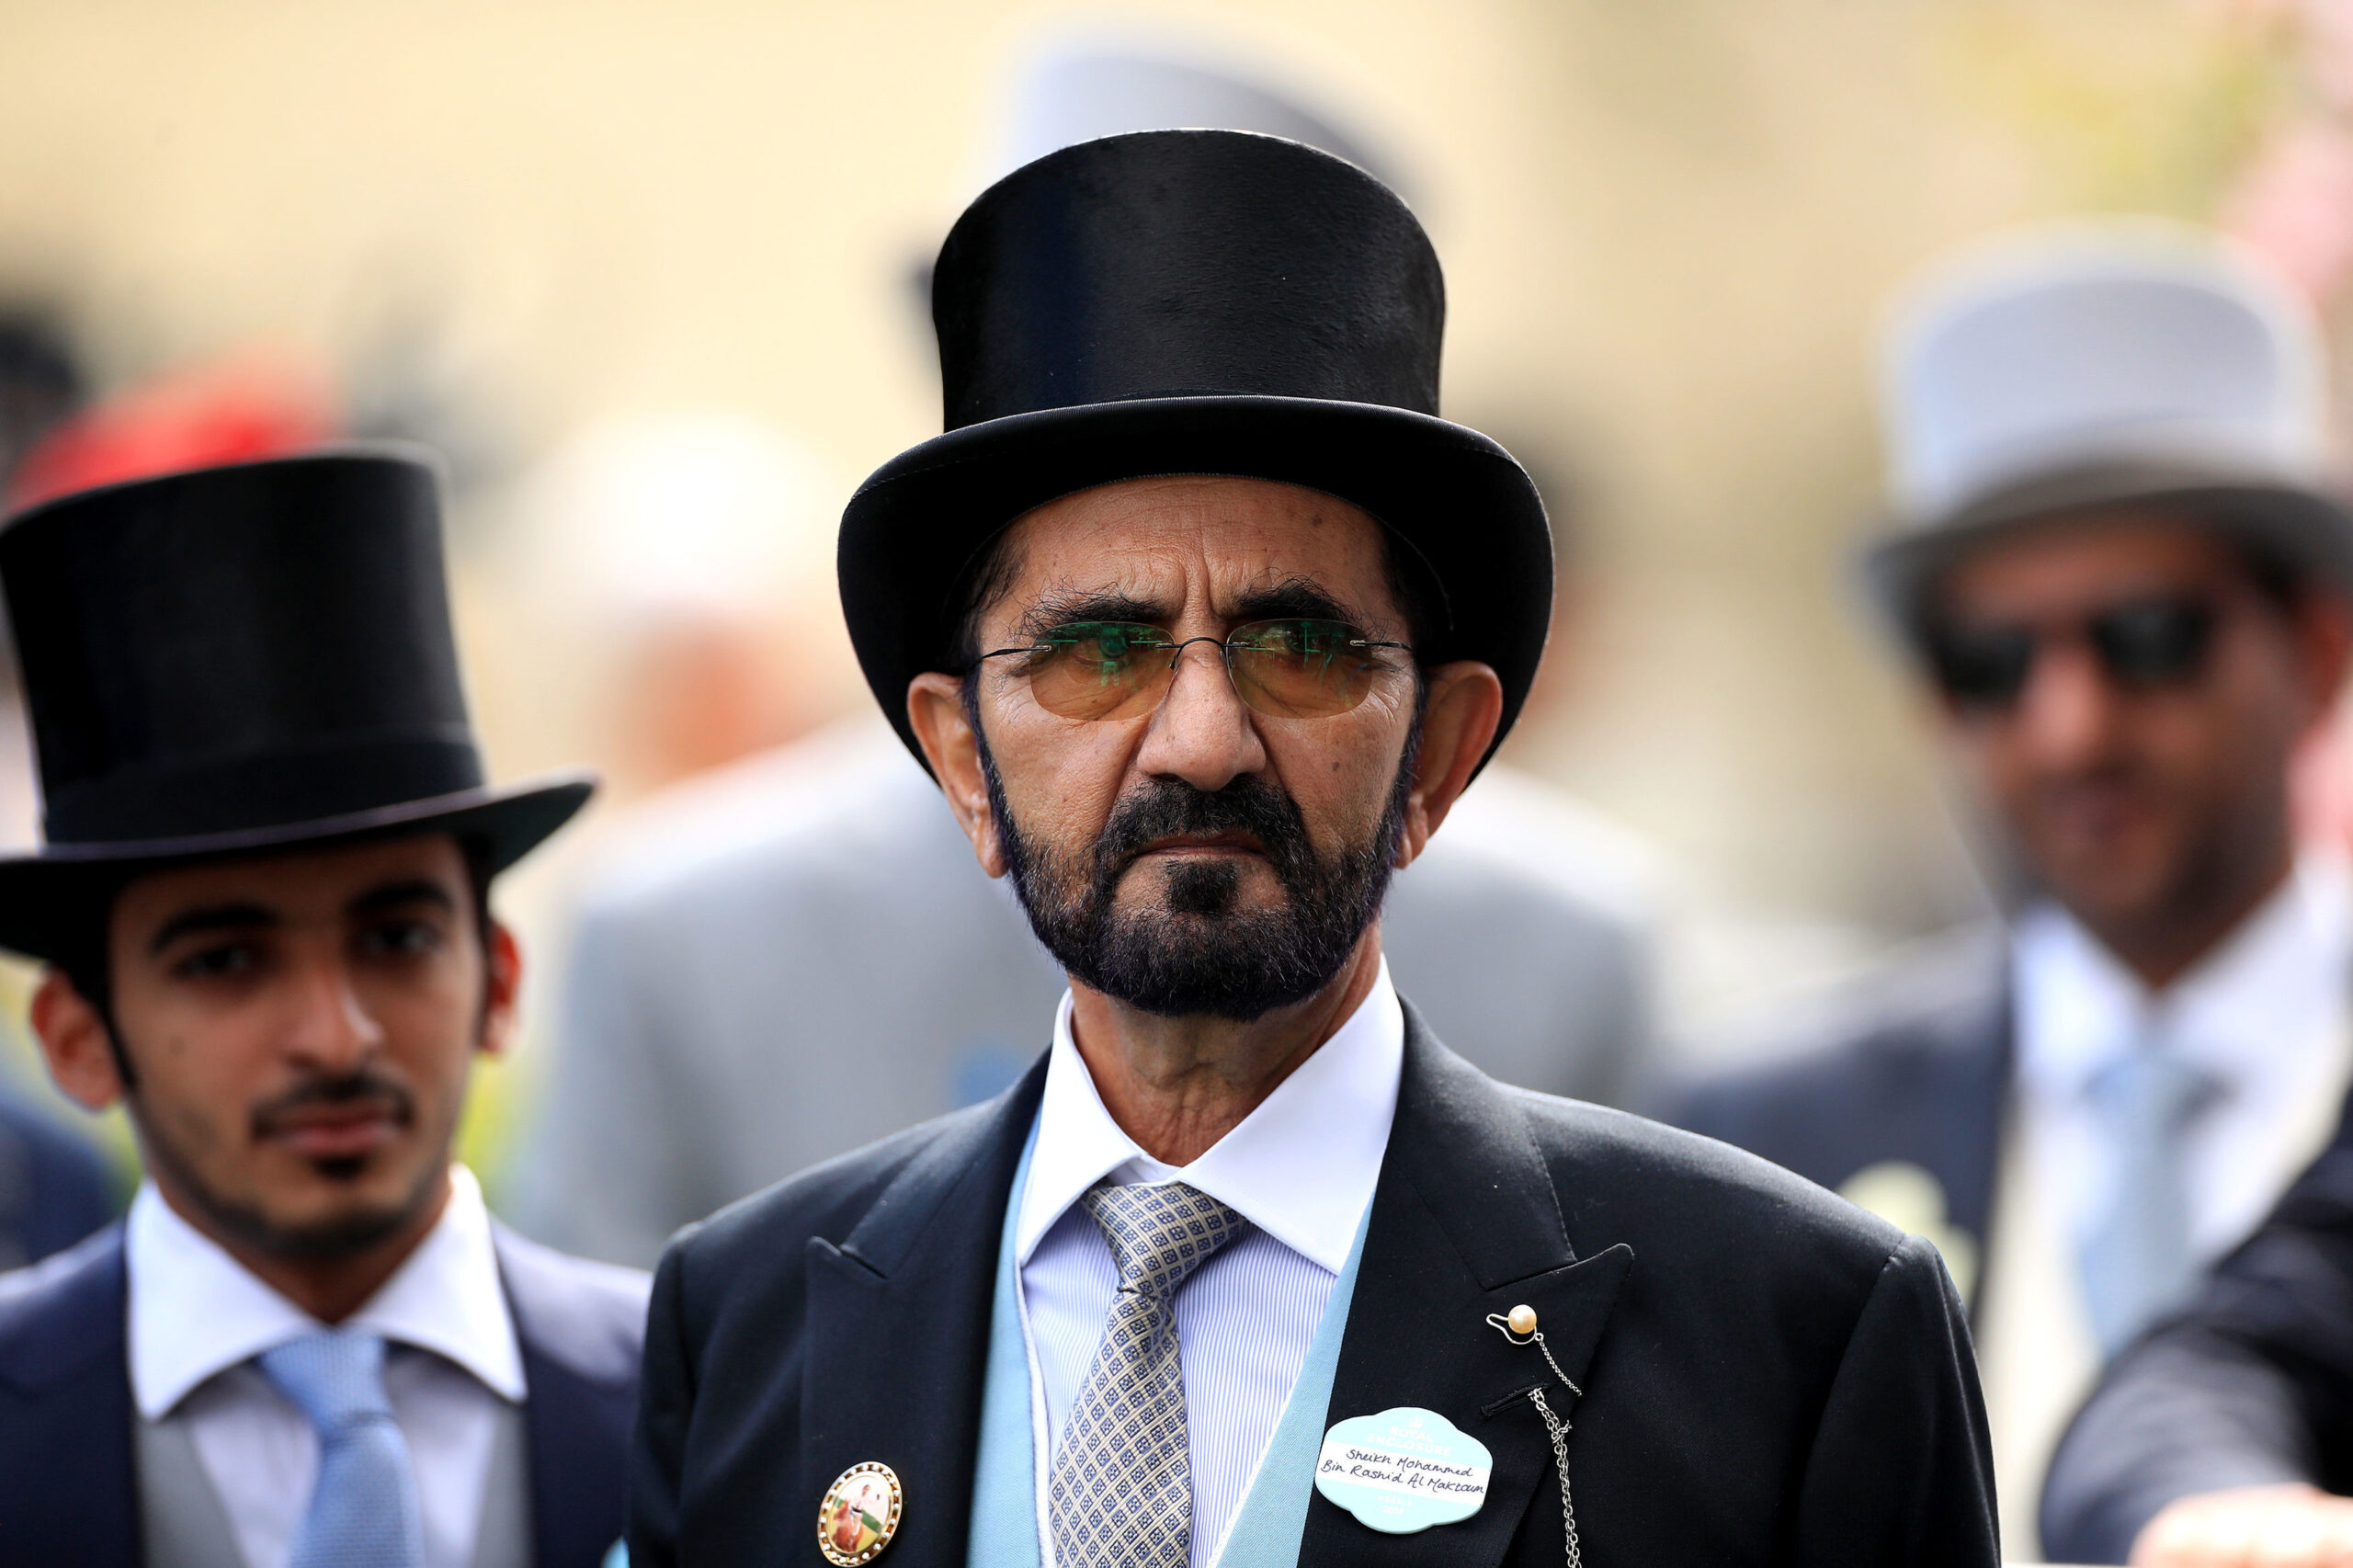 Sheikh Mohammed bin Rashid Al Maktoum is shown on June 22, 2019. A British court on Tuesday ordered the ruler of Dubai to pay his ex-wife and their children about 550 million pounds ($730 million), in one of the most expensive divorce settlements in British history. The High Court said Sheikh Mohammed bin Rashid Al Maktoum must pay 251.5 million pounds to his sixth wife, Princess Haya Bint Al Hussein, and make ongoing payments for their children Al Jalila, 14, and Zayed, 9 underpinned by a bank guarantee of 290 million pounds. (Mike Egerton/PA via AP)